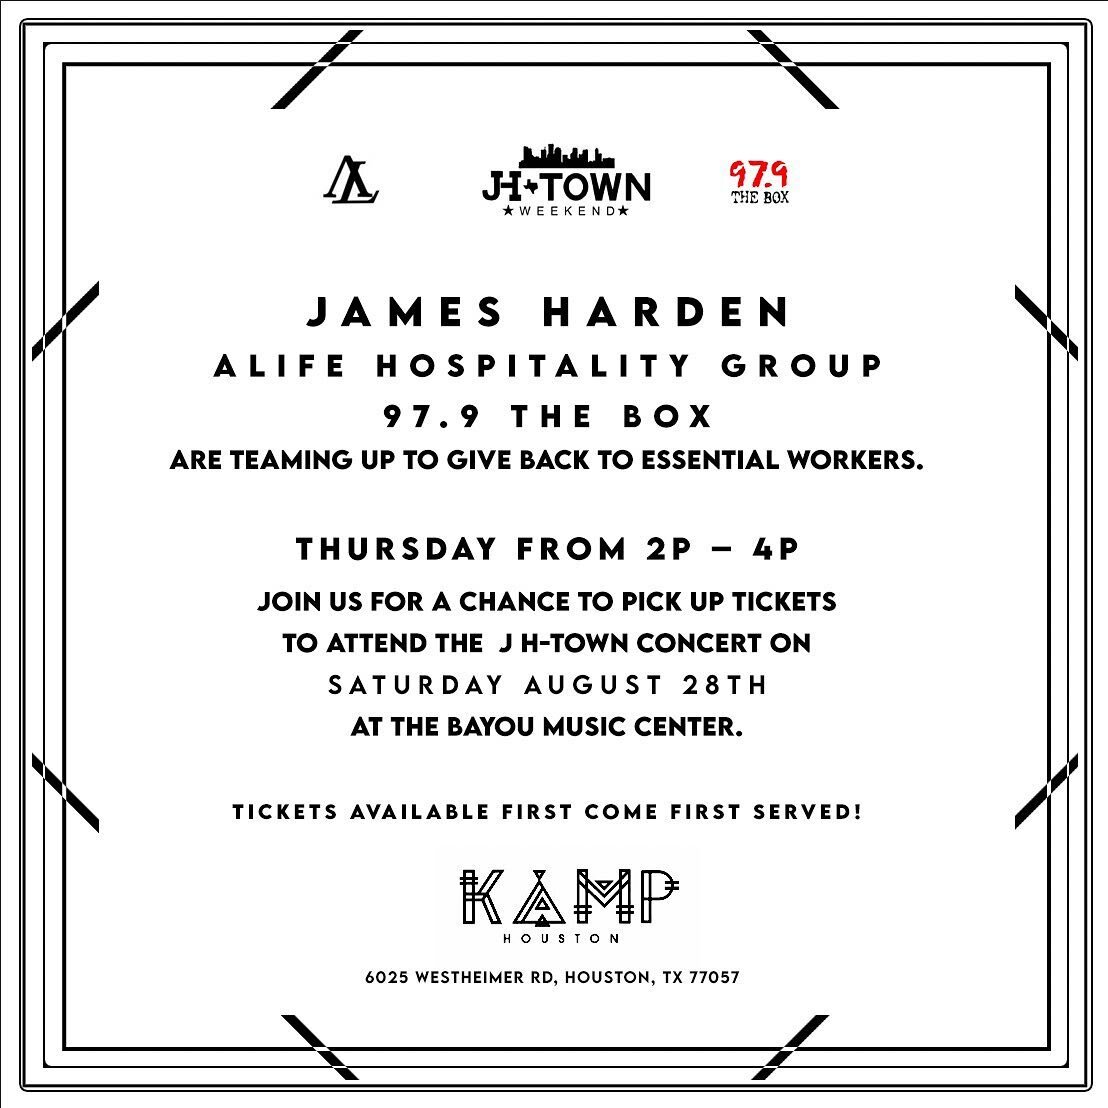 James Harden X Alife Hospitality Group X 97.9 are teaming up to give back to Houston Essential Workers

Join us Today Thursday Aug 26th from 2pm - 4pm at 
Kamp Houston @kamphouston (6025 Westheimer Rd.) 
for a chance to pick up tickets go to the JH T